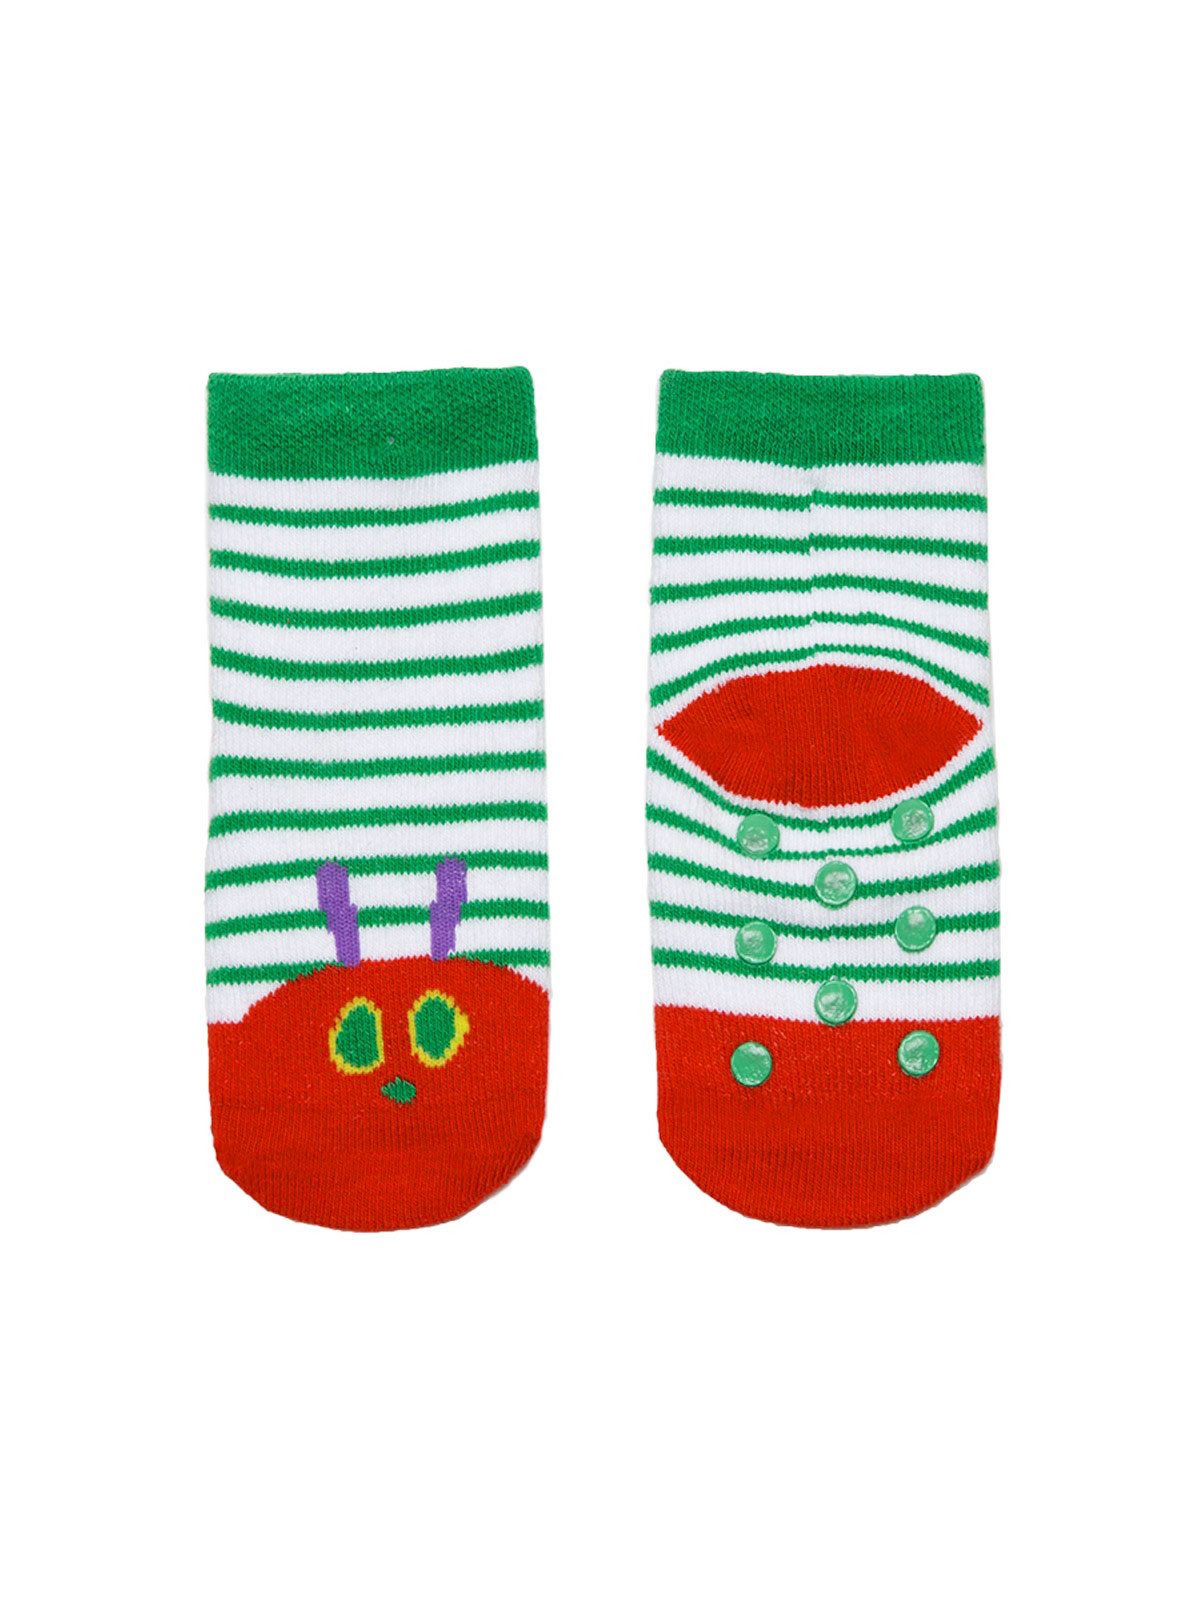 Shown from the front and back the white sock with green stripes and green cuff features a red heel and toe with the caterpillars face and antenna on on the toe. These socks also feature rubber grips on the foot.